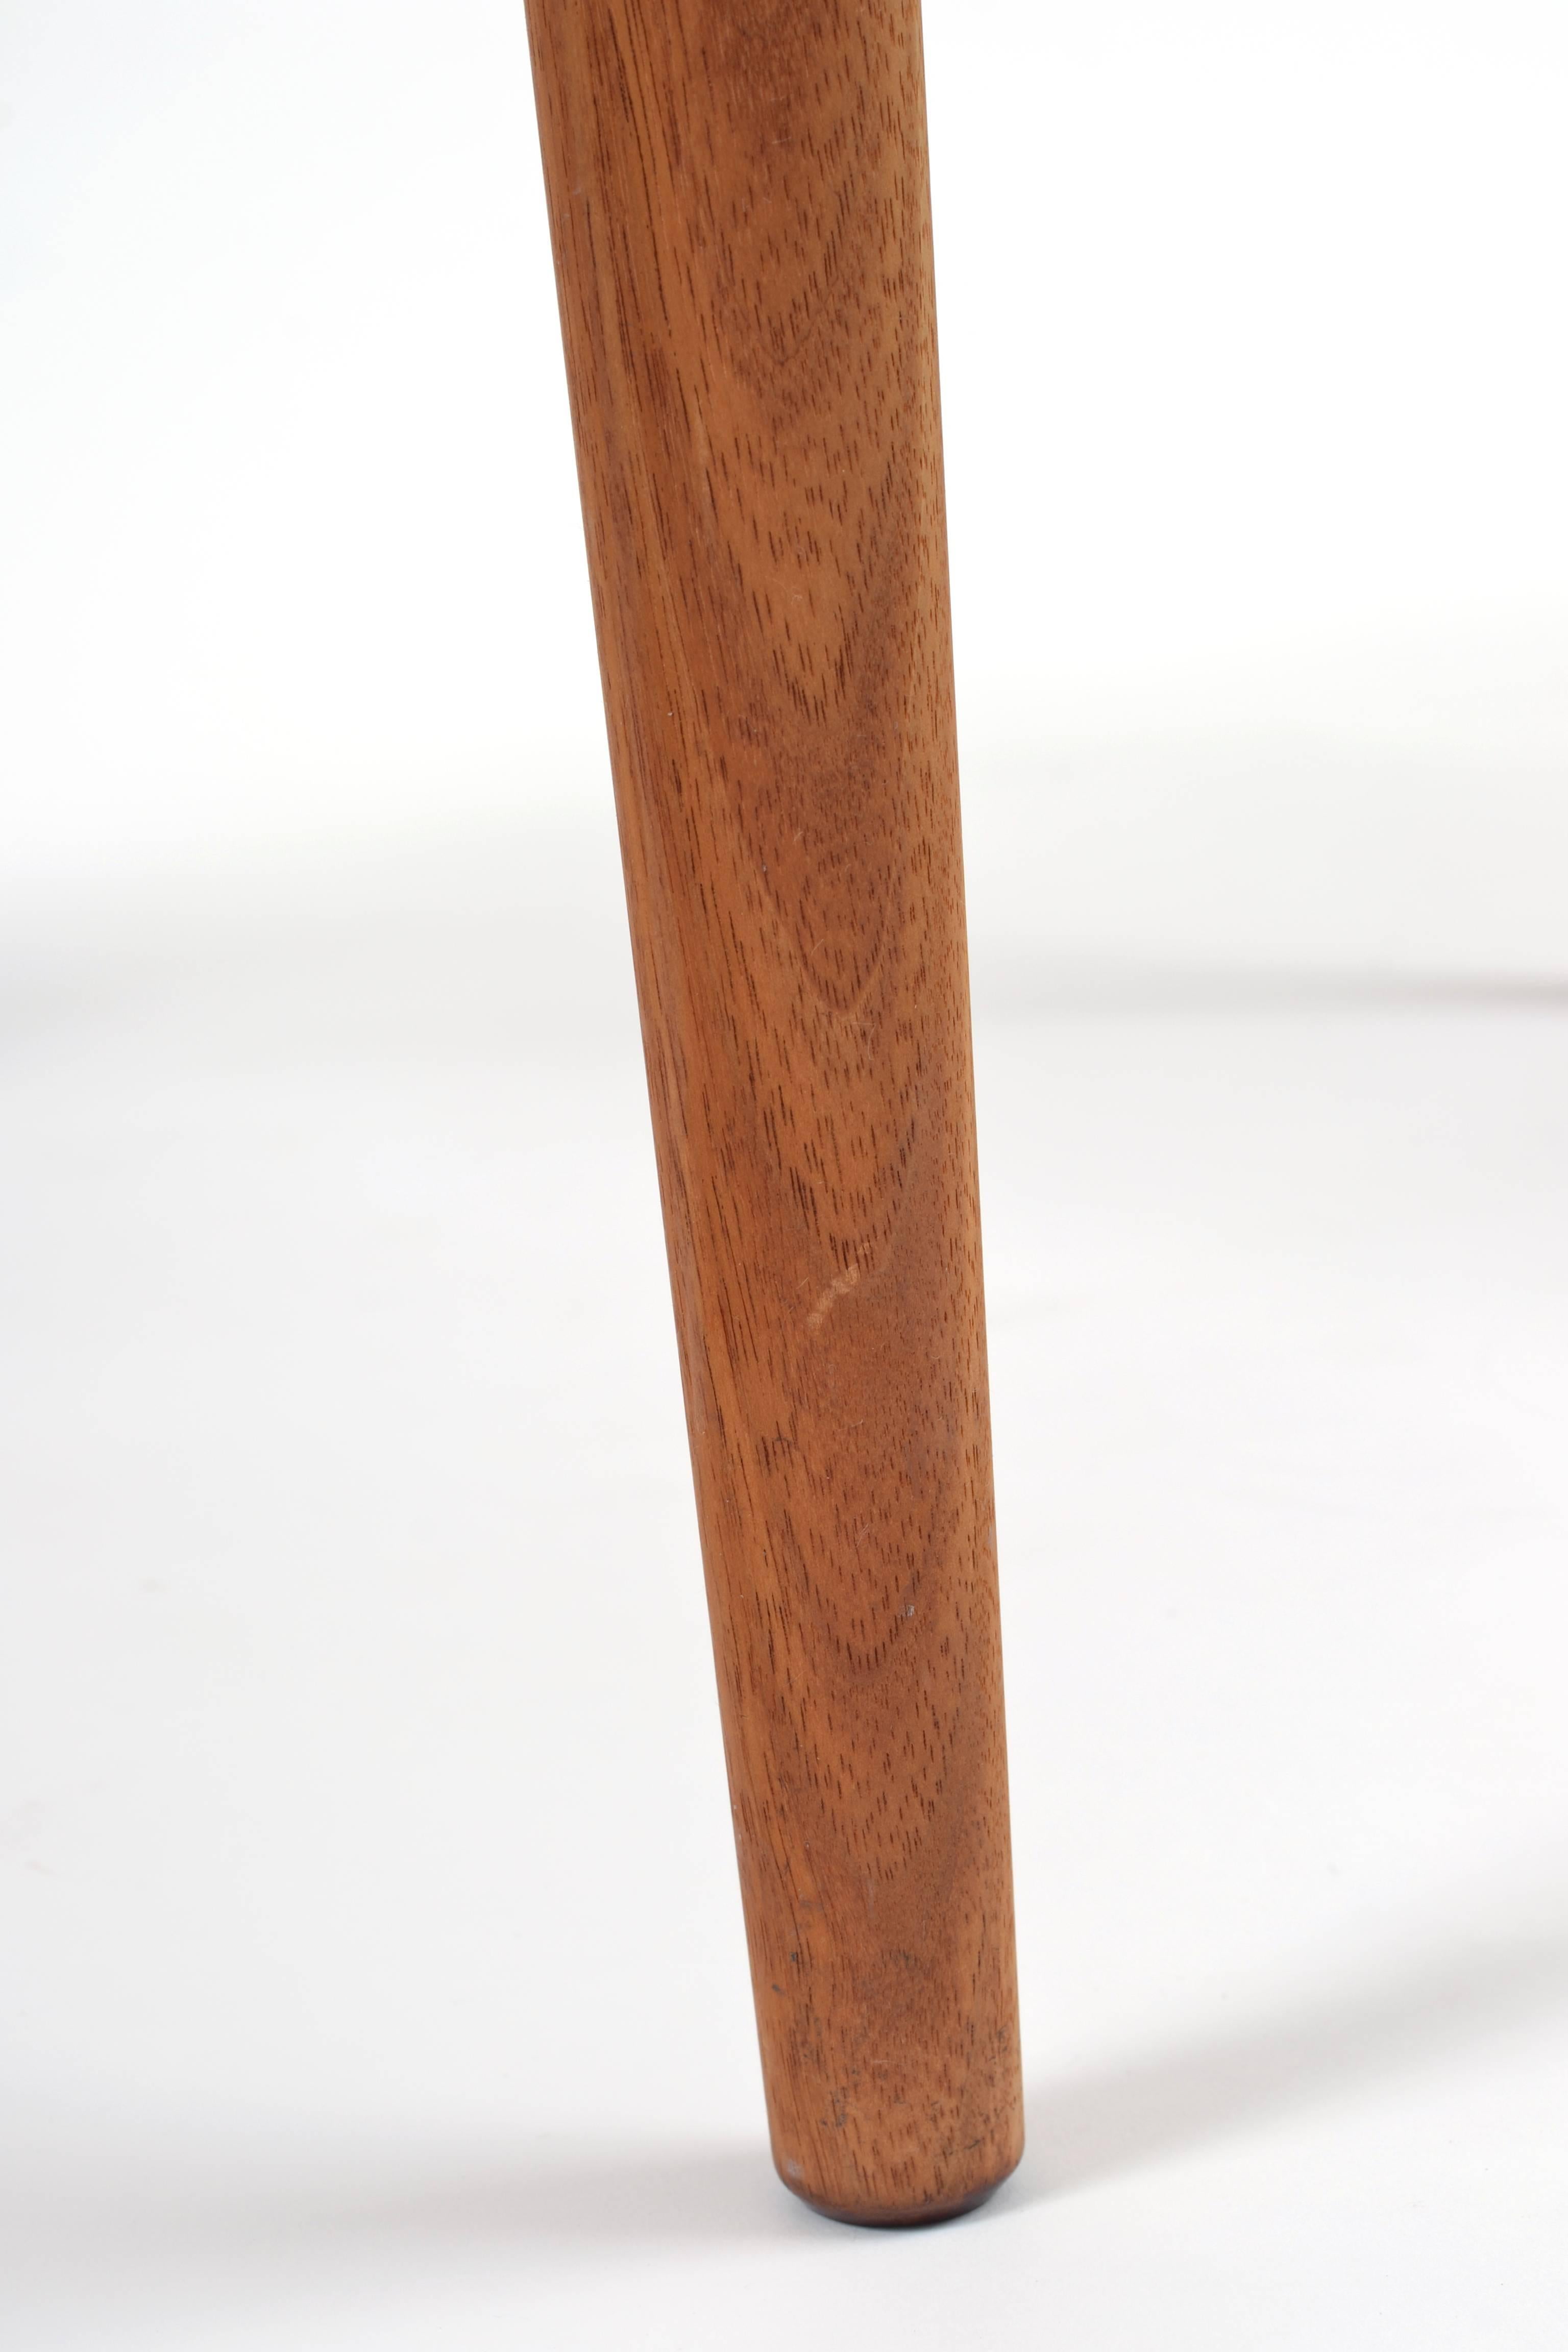 Danish Style Walnut Side Table Attributed to Jerry Glaser For Sale 1